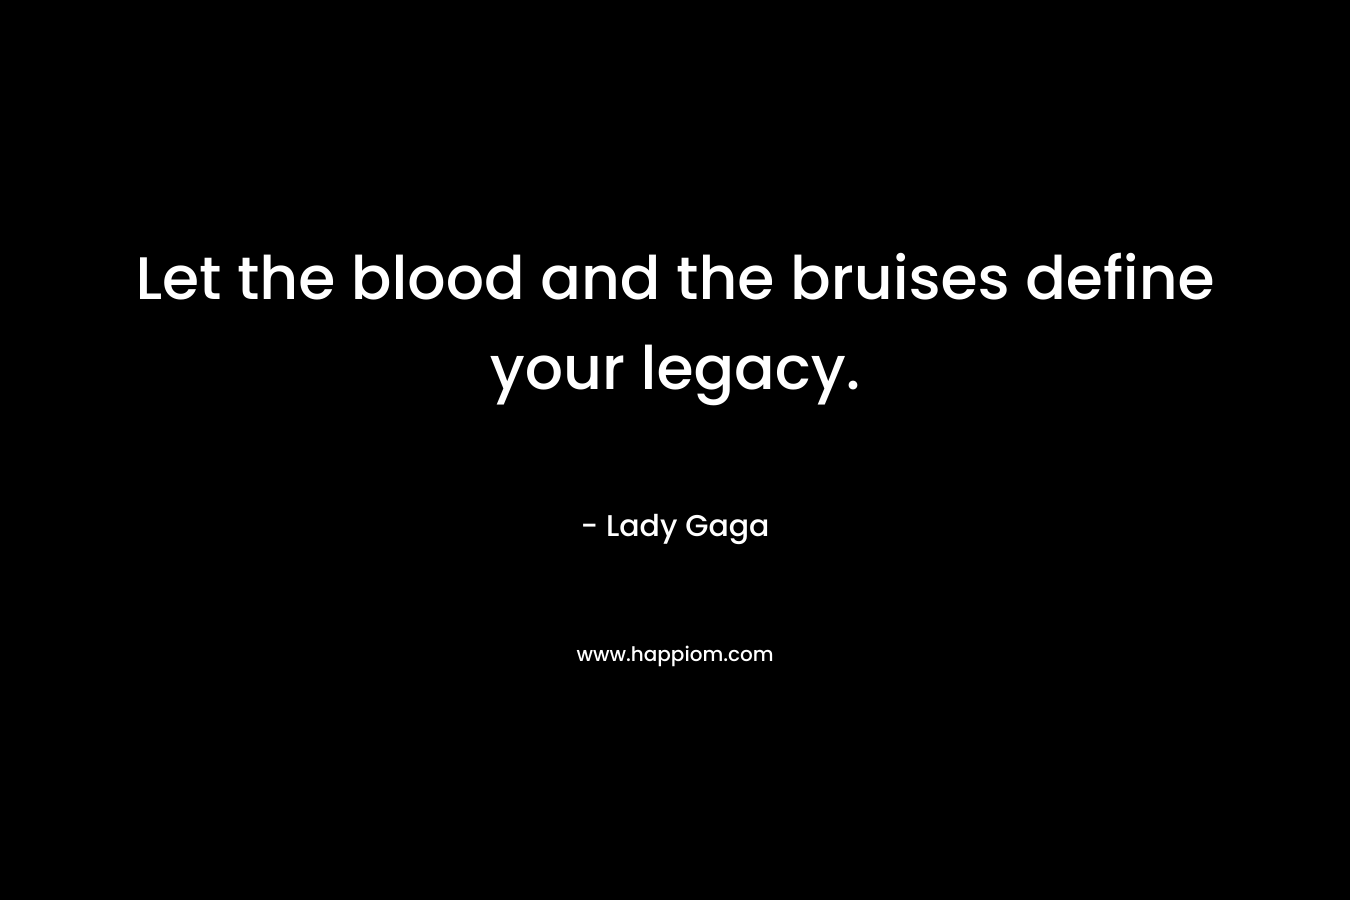 Let the blood and the bruises define your legacy. – Lady Gaga